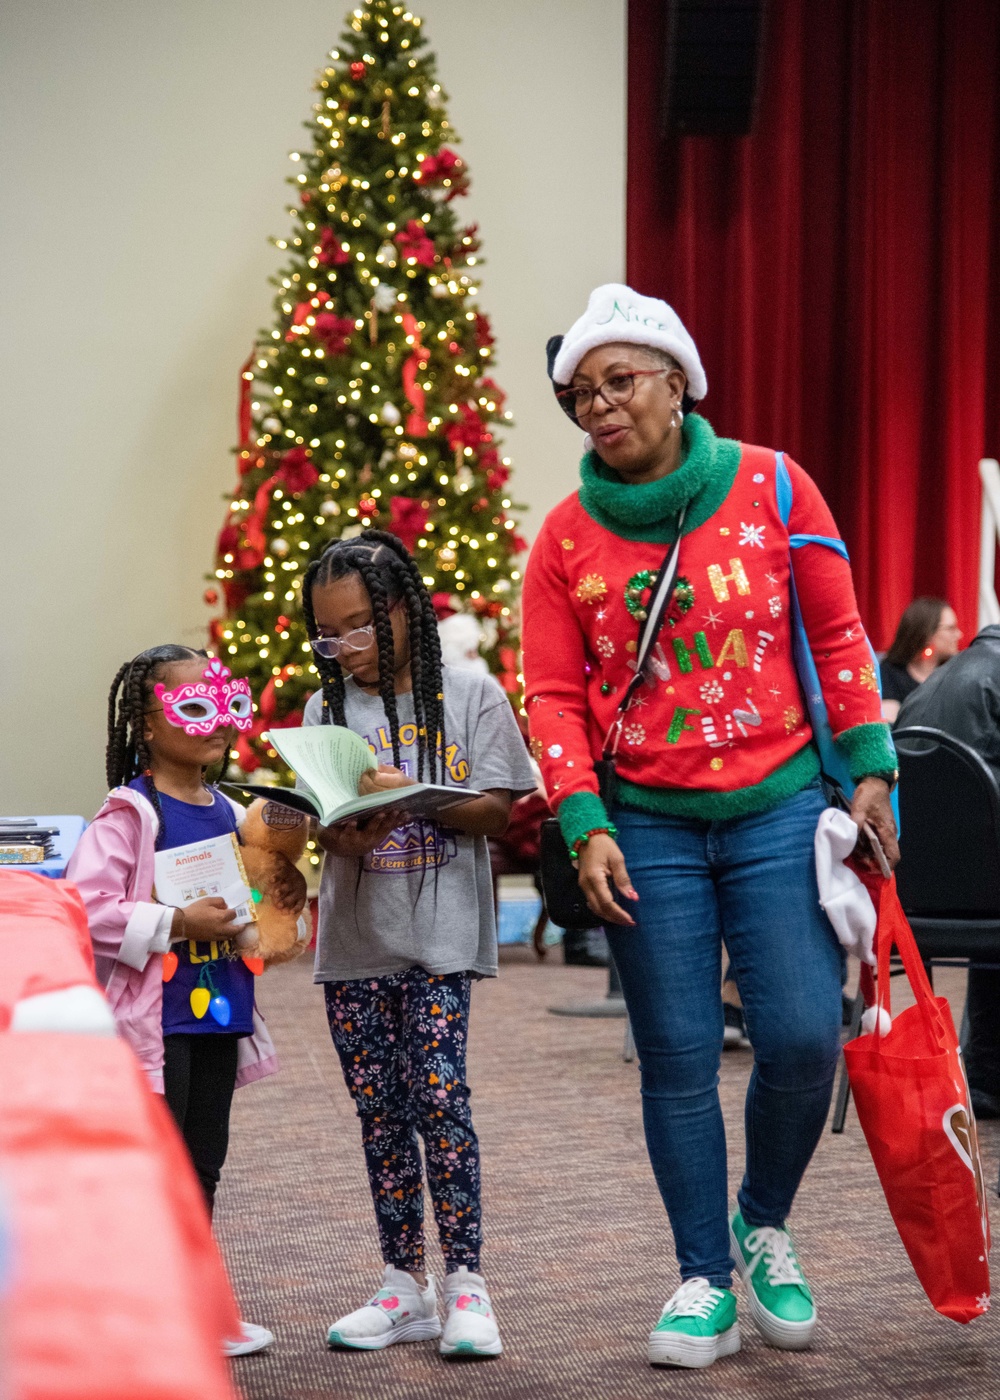 EFMP Family Support celebrates holidays with JBSA families